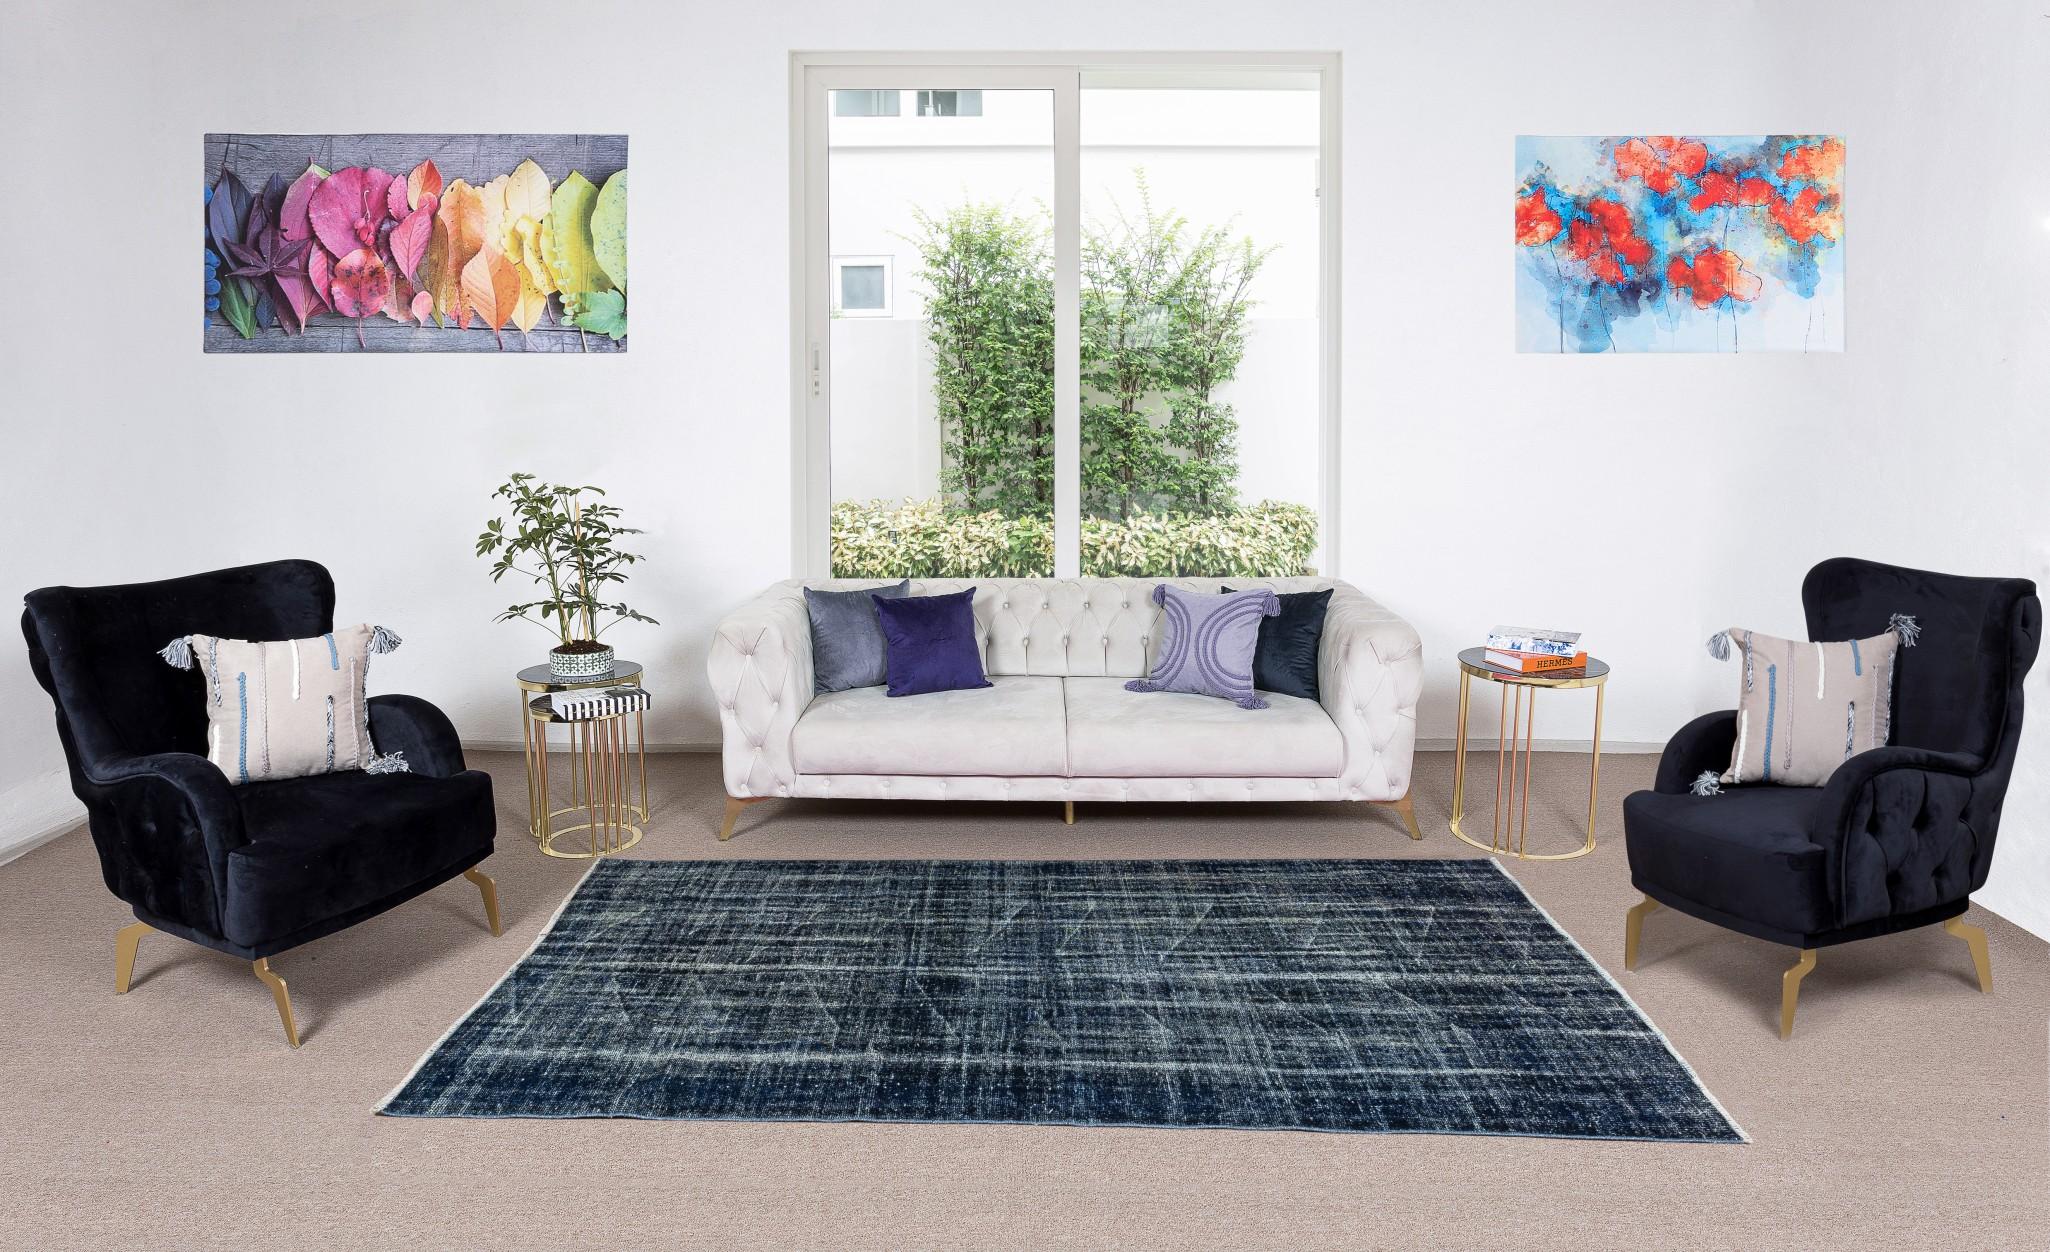 Our over-dyed rugs are all hand knotted vintage pieces that are recreated in our workshop to cater to a wider range of interior design choices from modern to coastal, from Industrial to rustic/cottage. These 50 to 70 year-old rugs were hand knotted